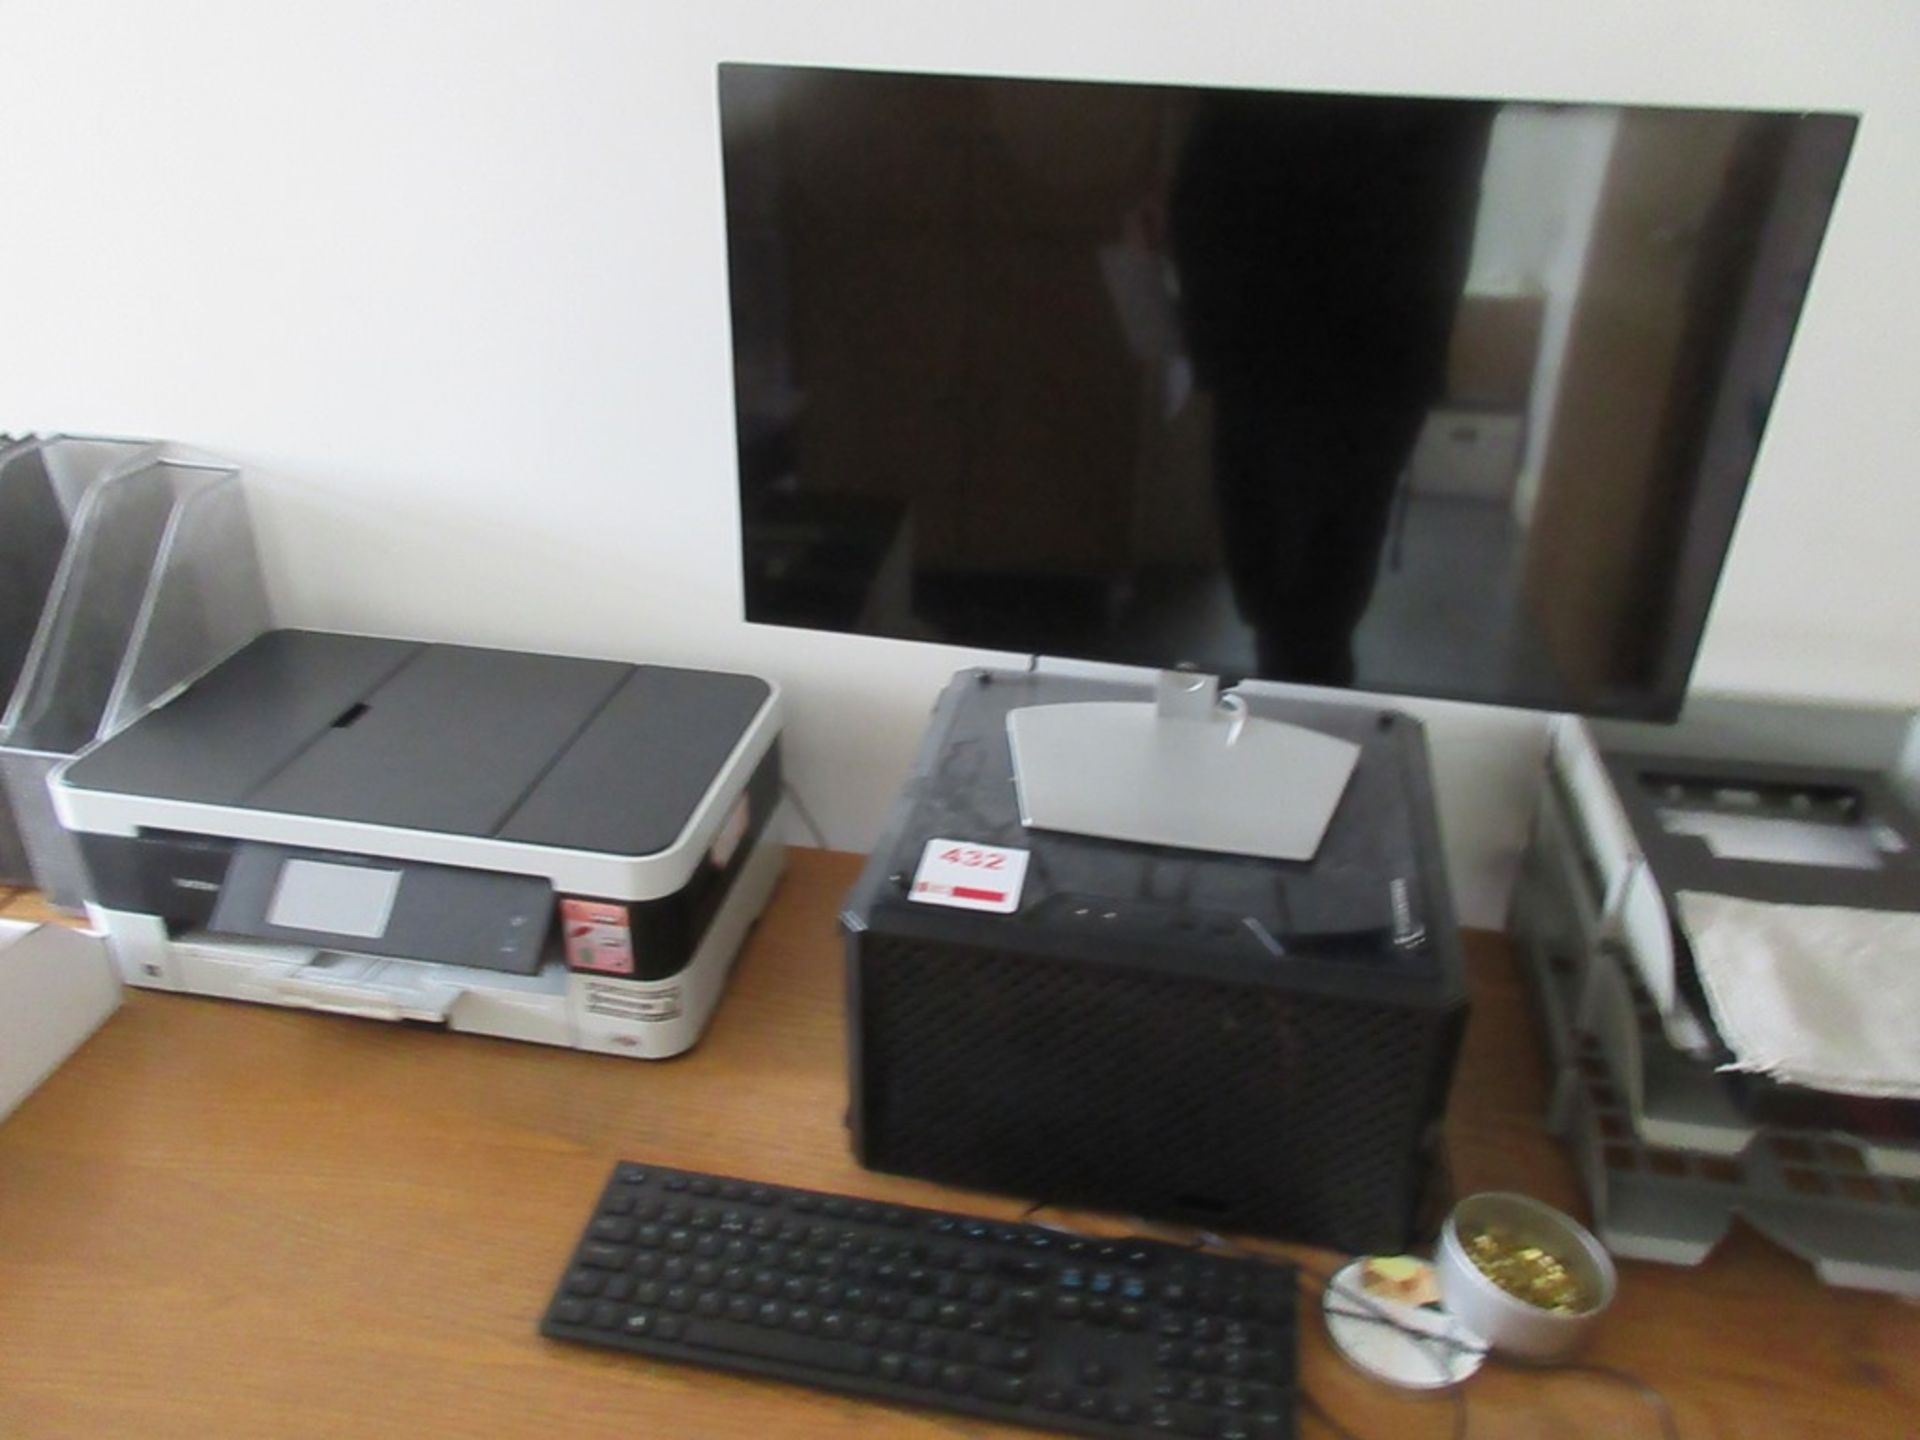 Dell flat screen monitor, keyboard, mouse and Brother MFC-J4625D